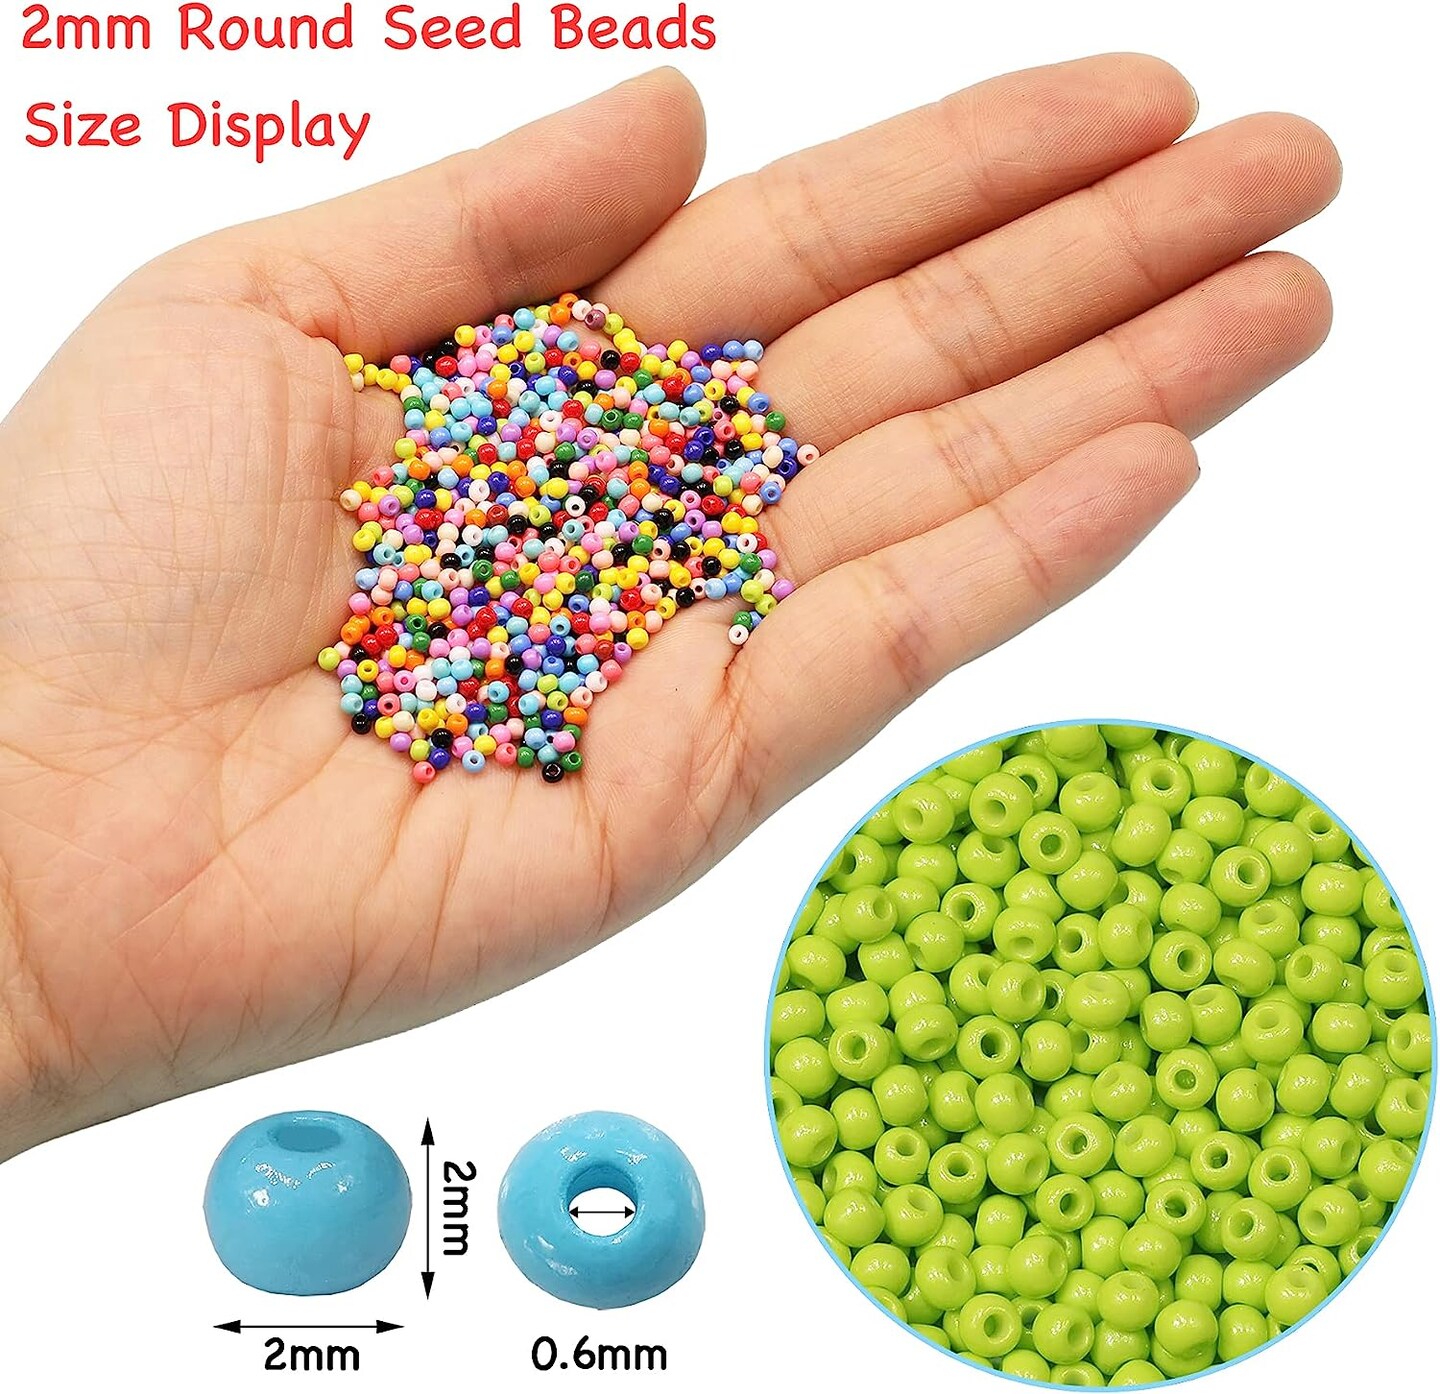 2mm Round 12/0 Seed Beads About 20000pcs in Box 28 Crayon Colors Seed Beads for Making Jewelry